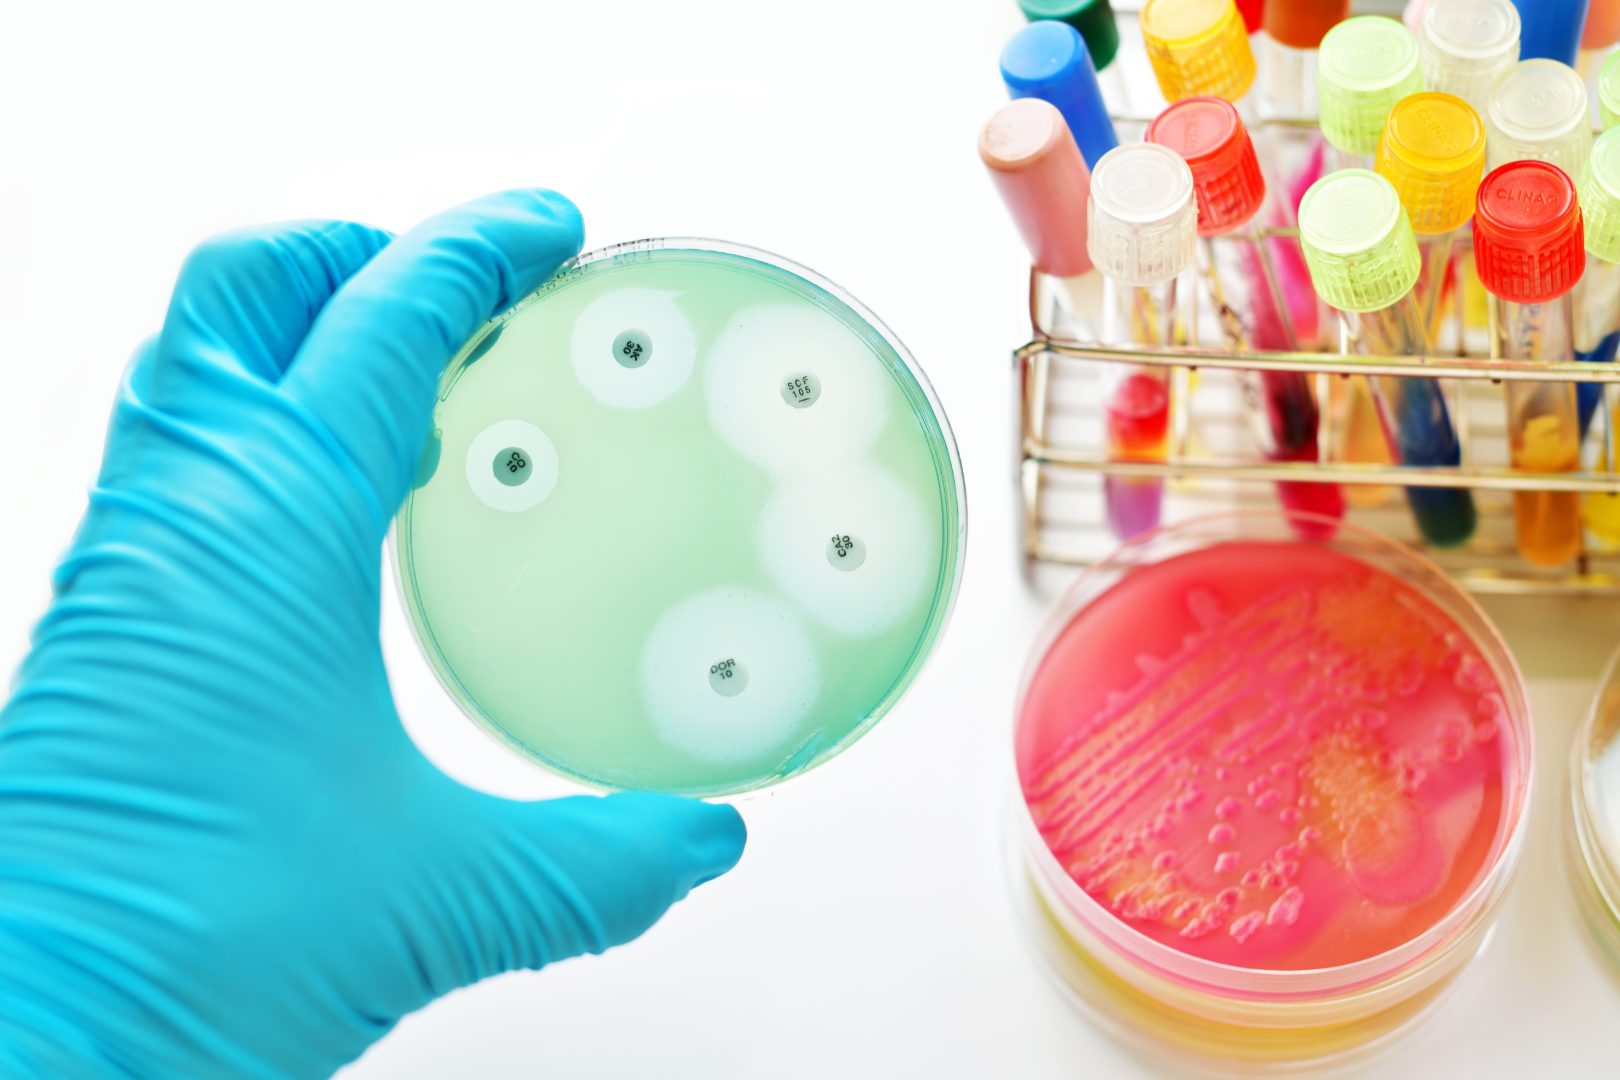 Antimicrobial Susceptibility Test Market to Receive Overwhelming Hike in Revenue That Will Boost Overall Industry Growth by 2031